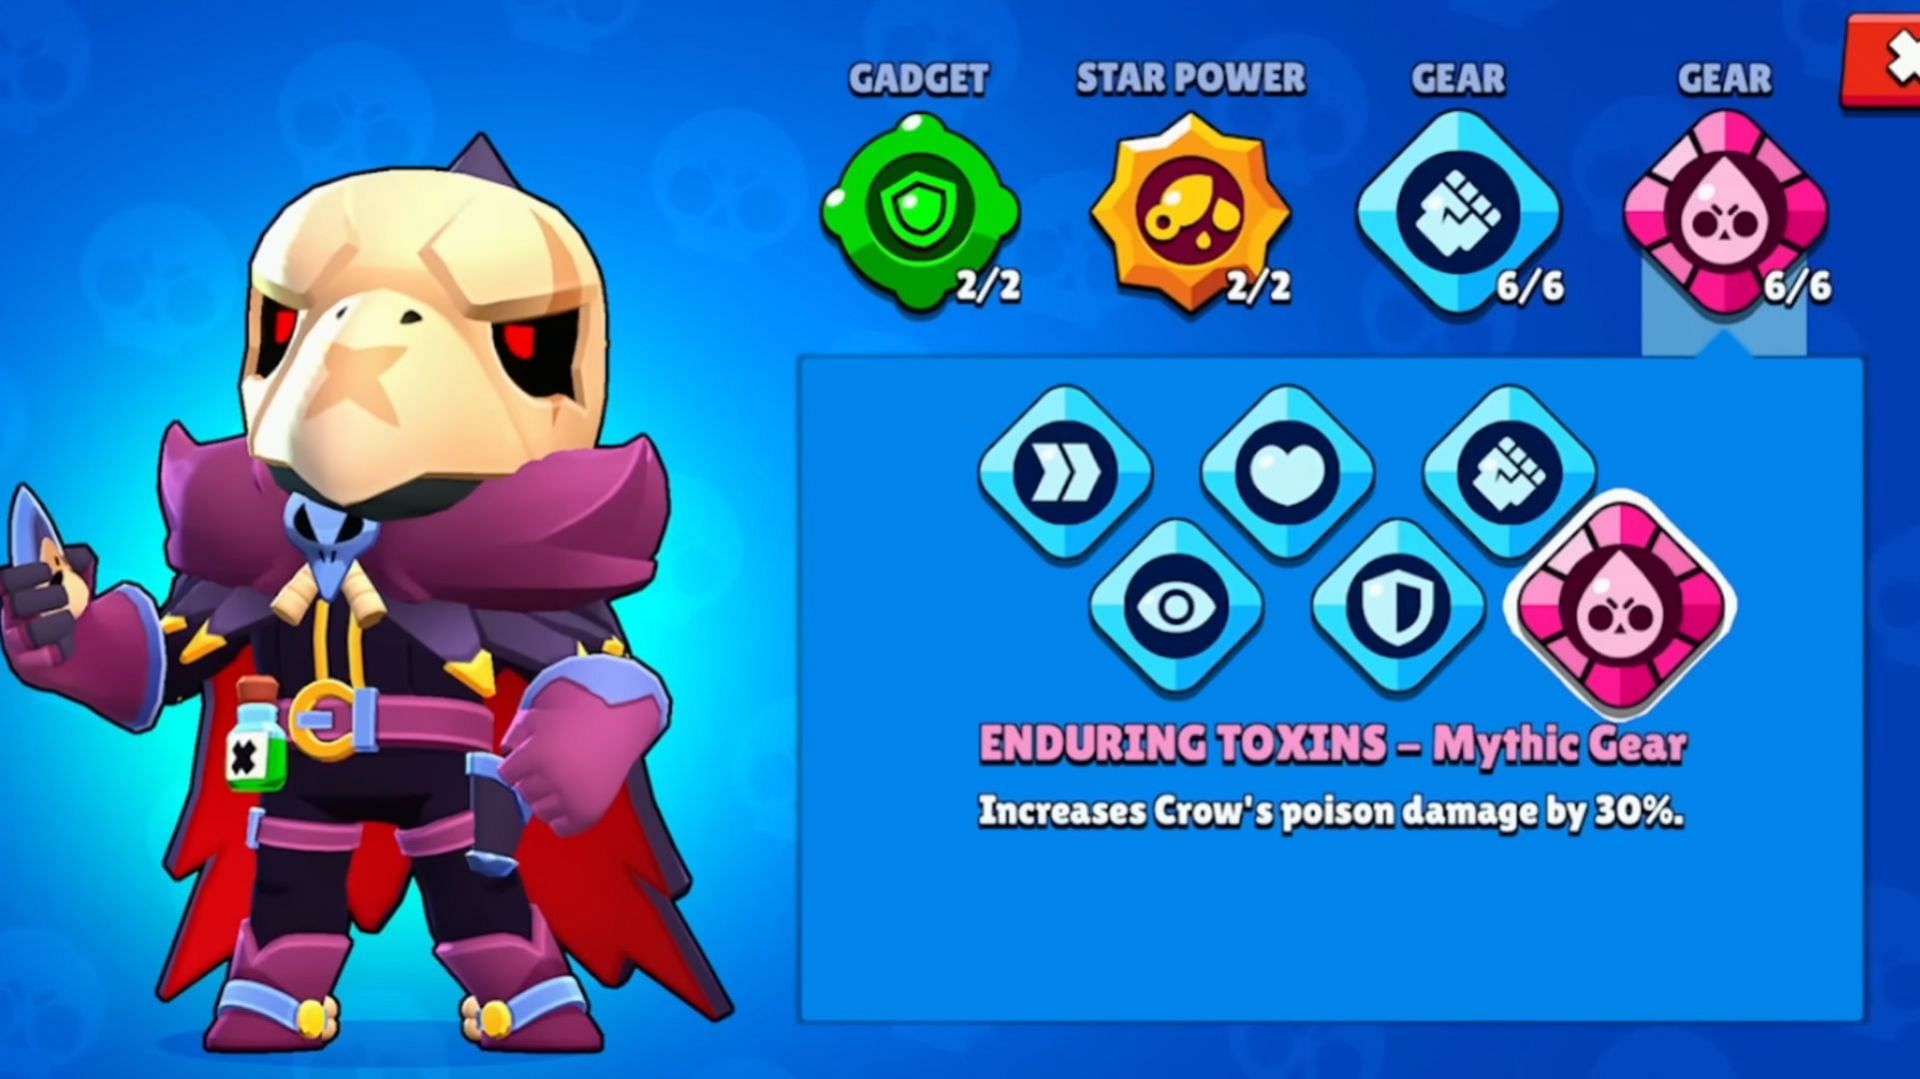 Enduring Toxins Mythic Gear (Image via Supercell)